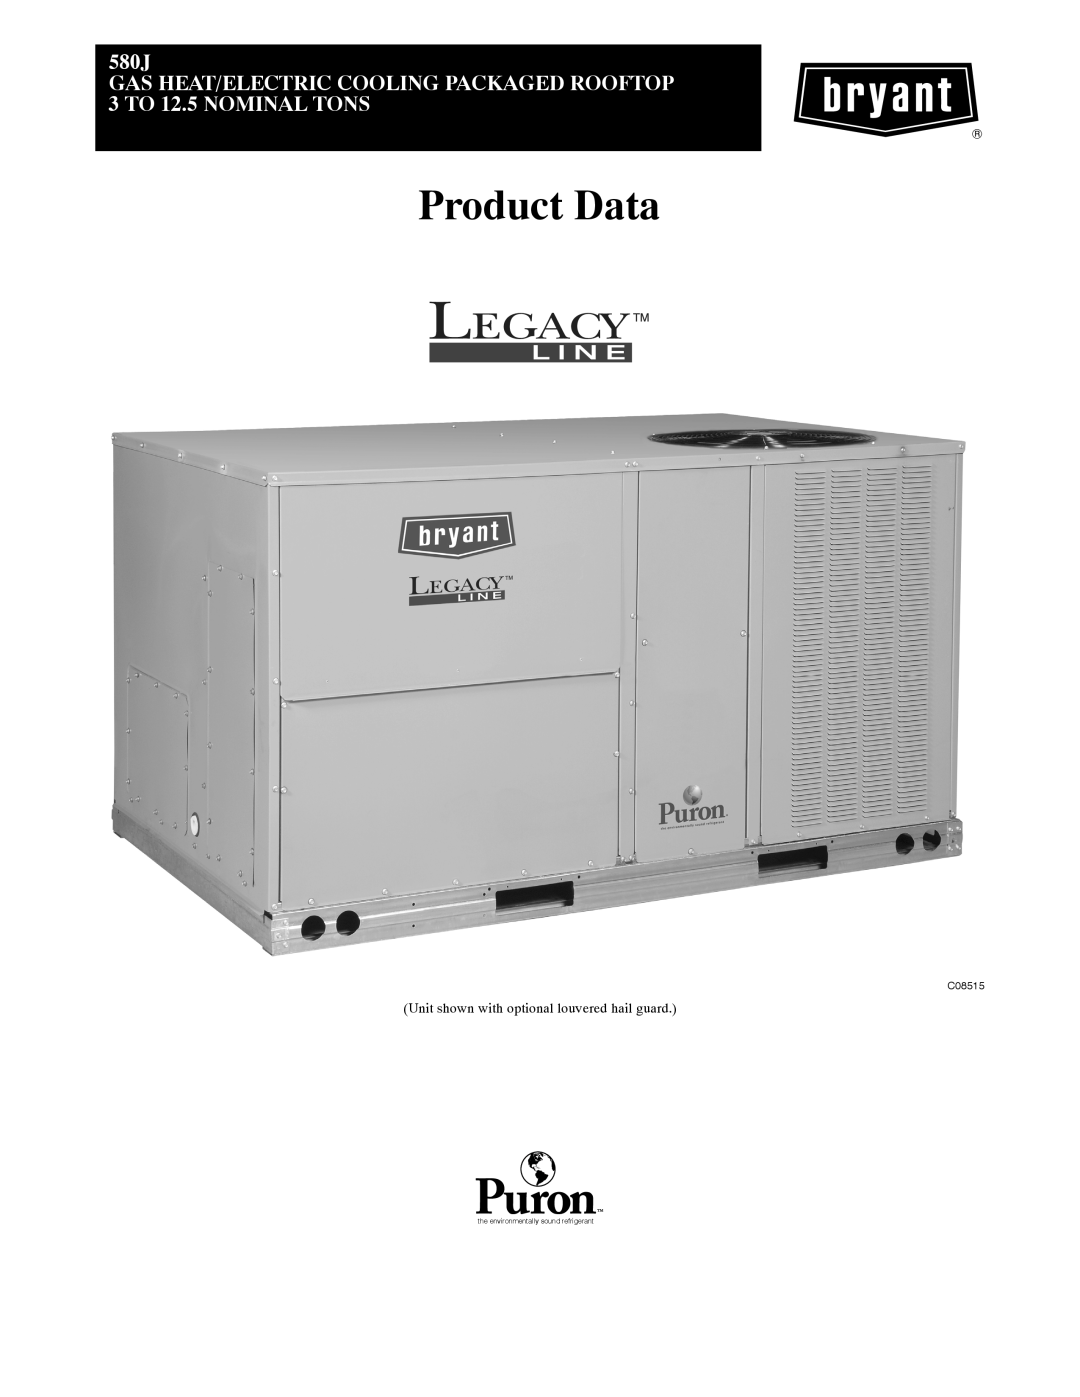 Bryant 580J manual Product Data, Unit shown with optional louvered hail guard, the environmentally sound refrigerant 